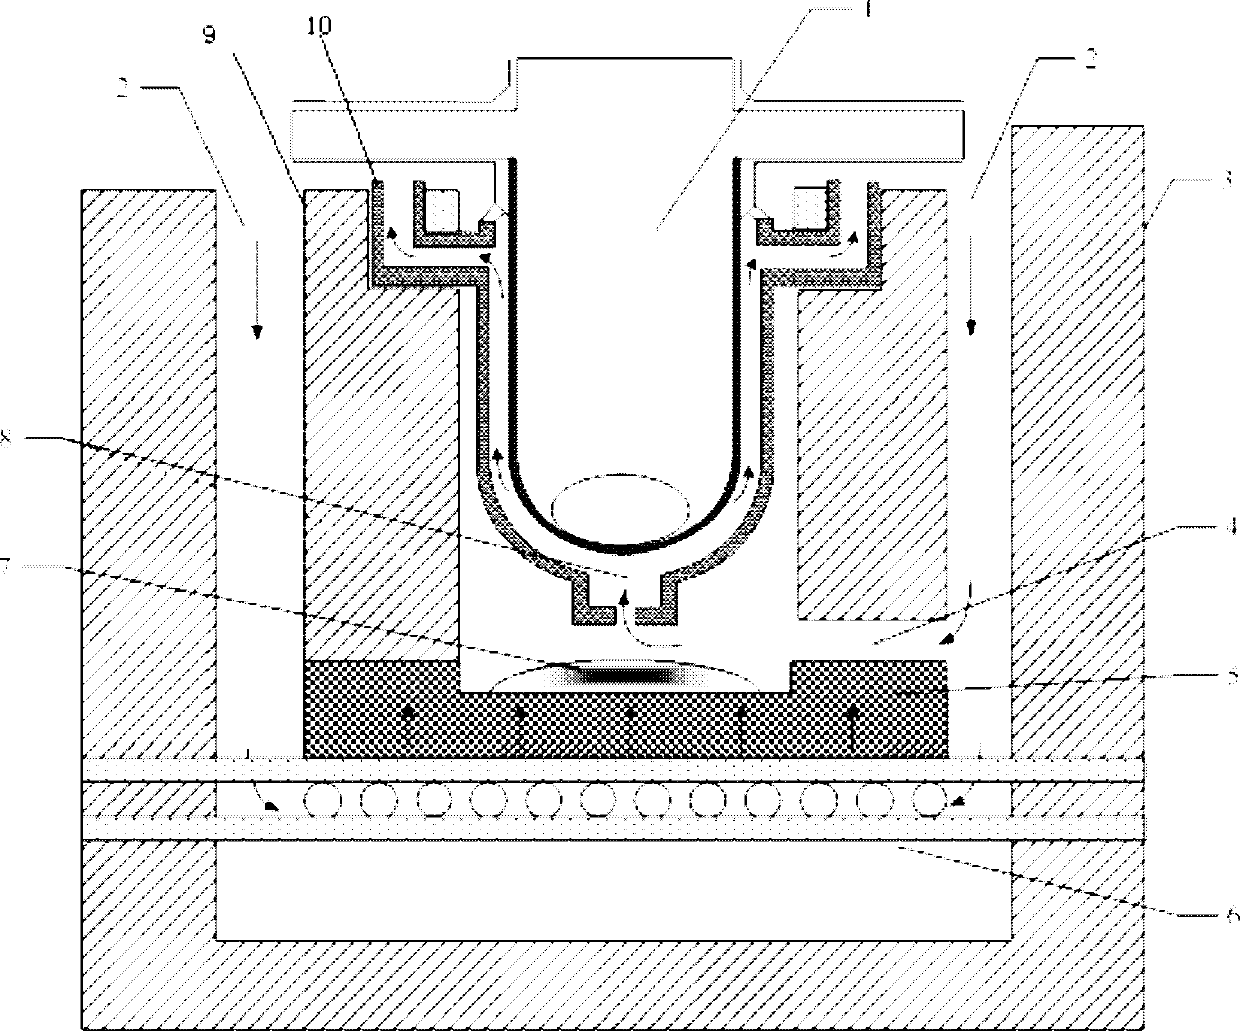 V-shaped reactor external melt retention device used after nuclear power plant accident